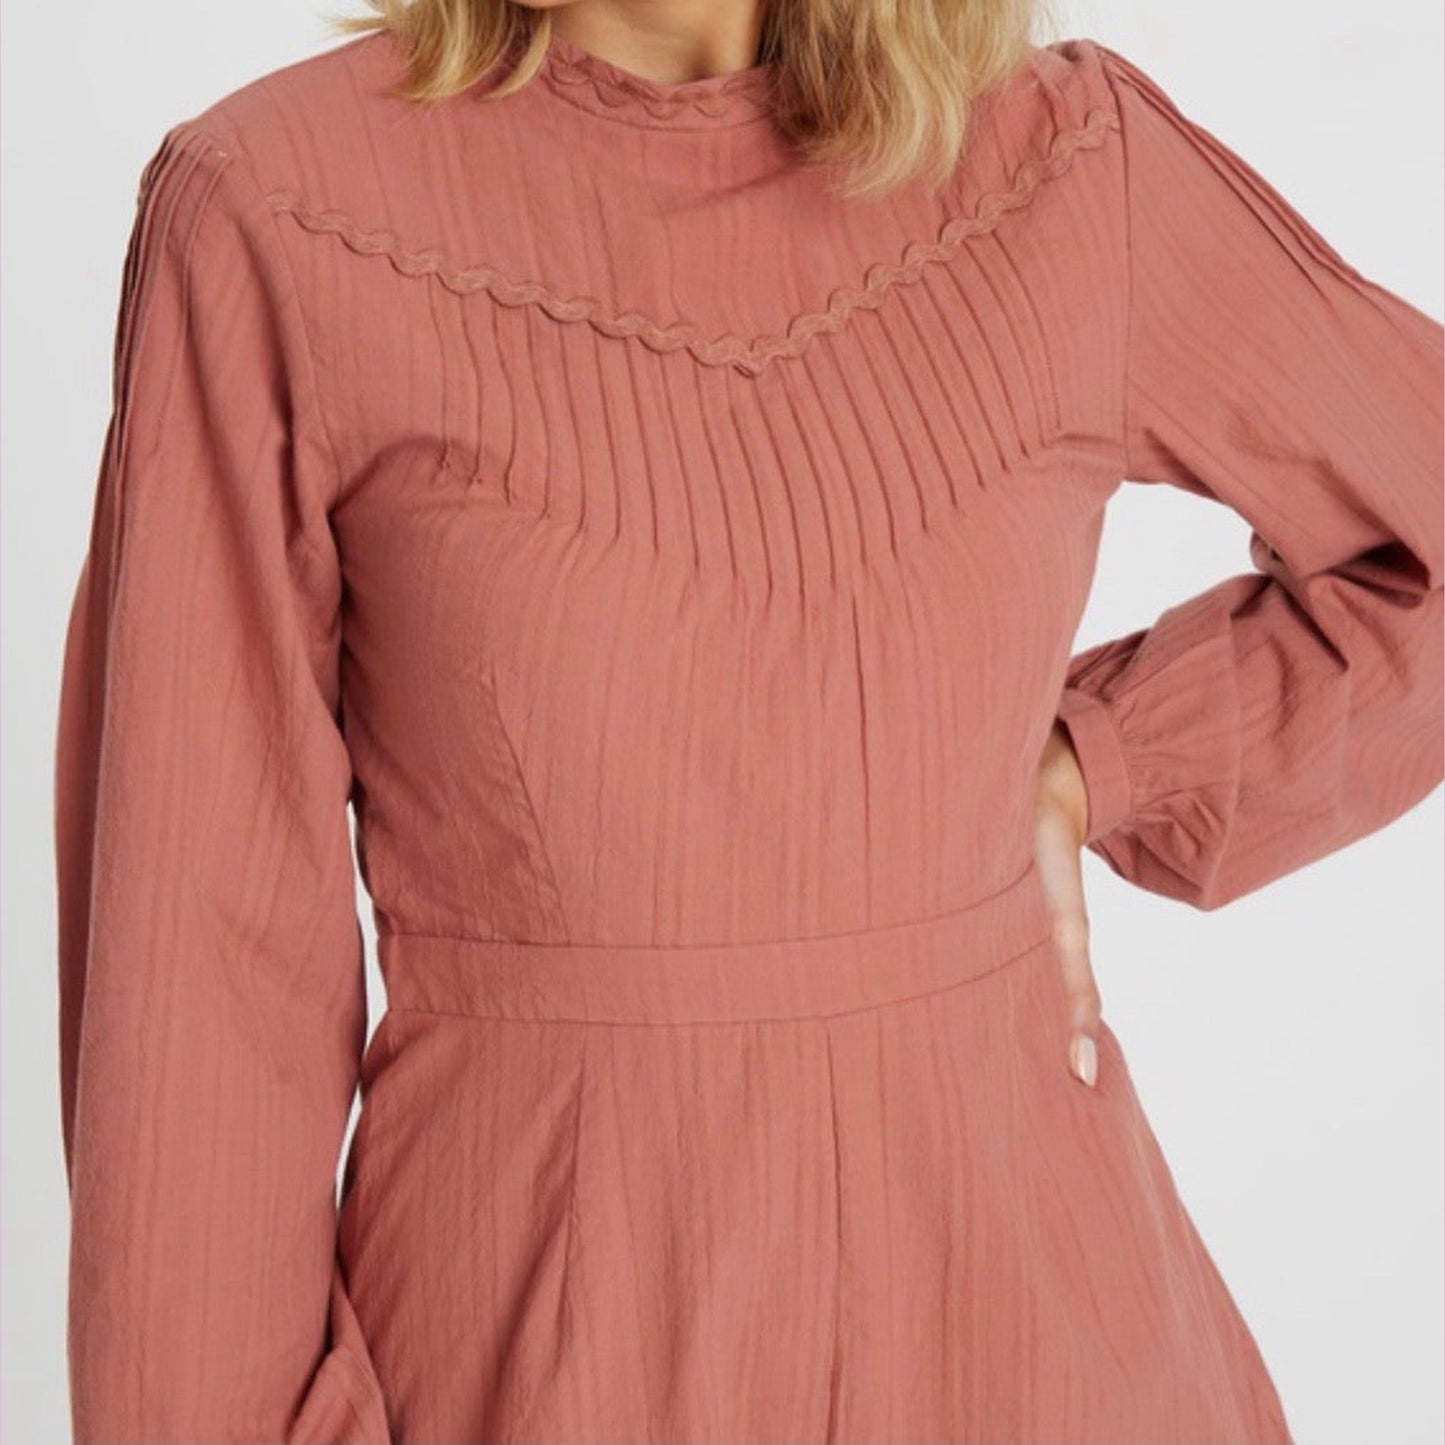 Baby It's You Playsuit - Dusty Pink